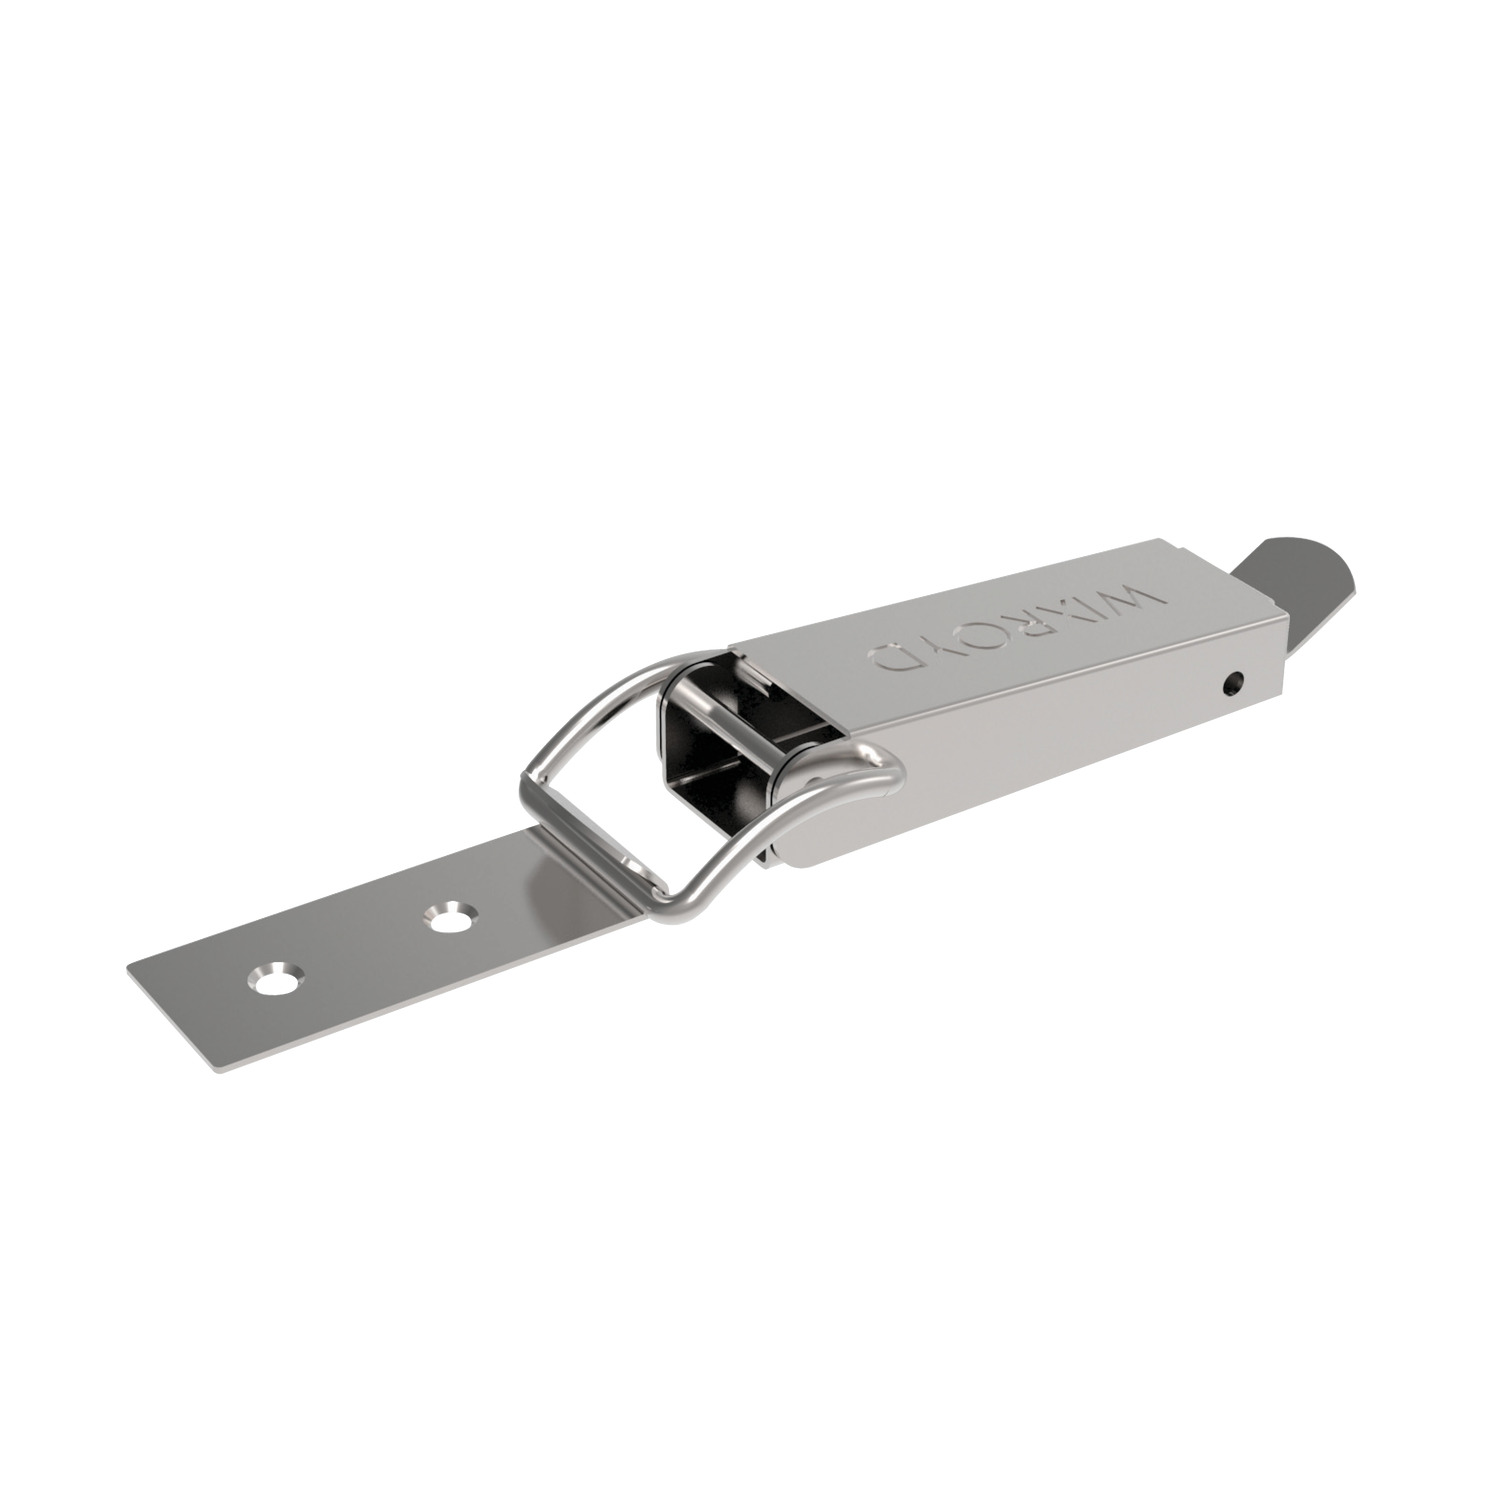 Toggle Latches Simple fixed draw type toggle latch available in steel or stainless steel. Counter strike supplied.